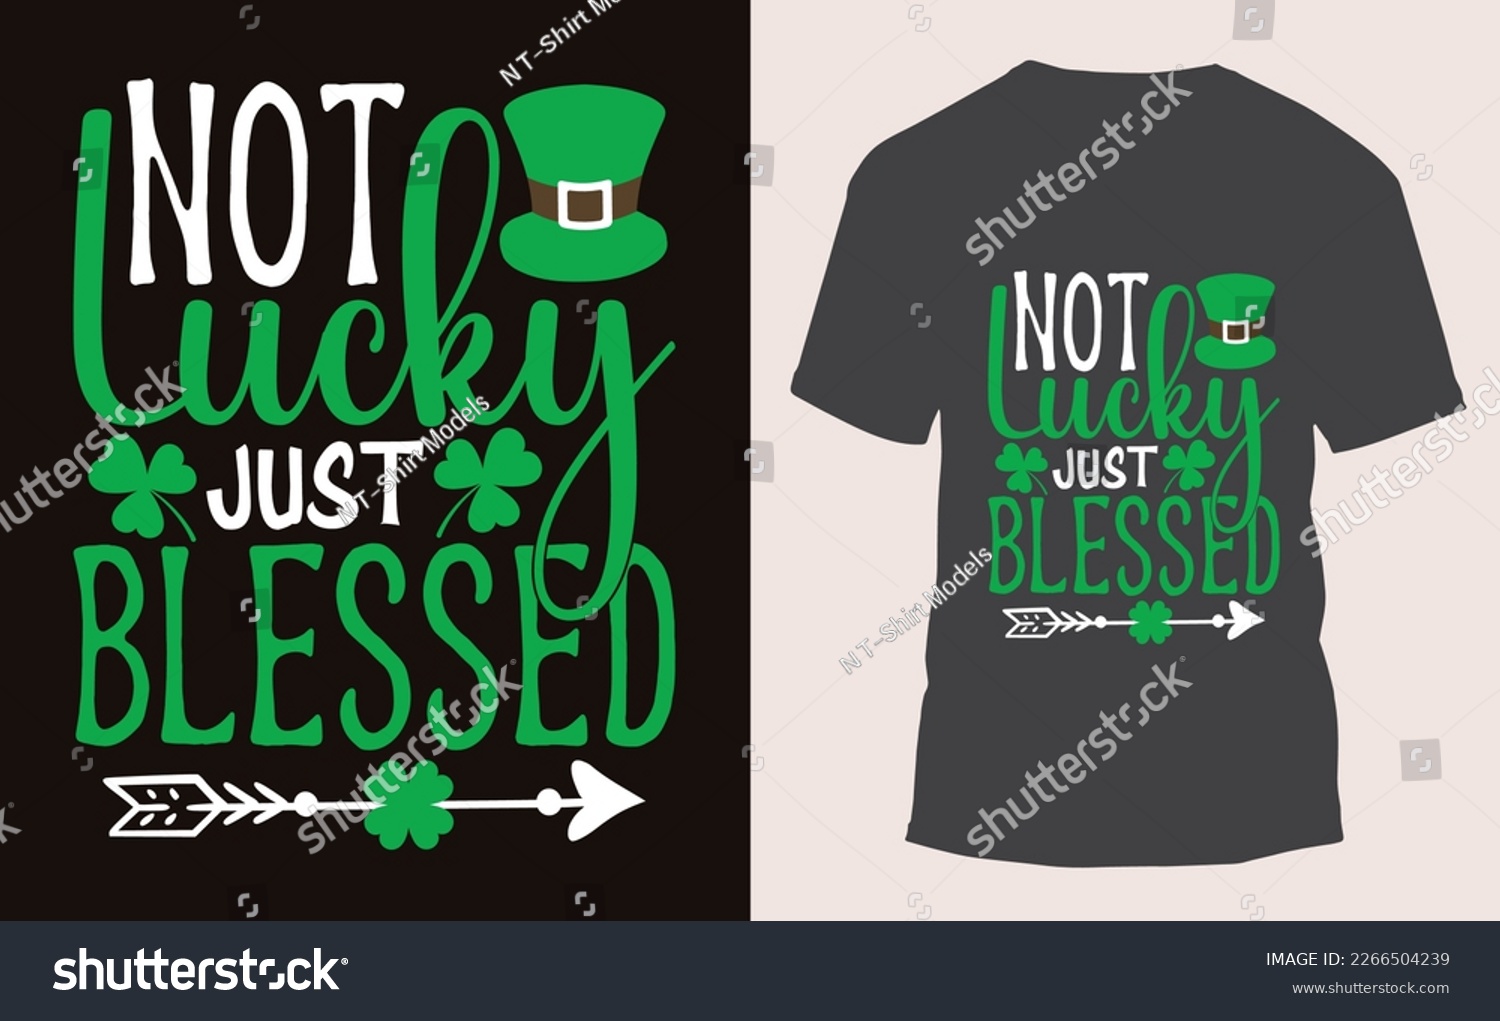 SVG of Not Lucky Just Blessed, St. Patrick's day t-shirt design. svg